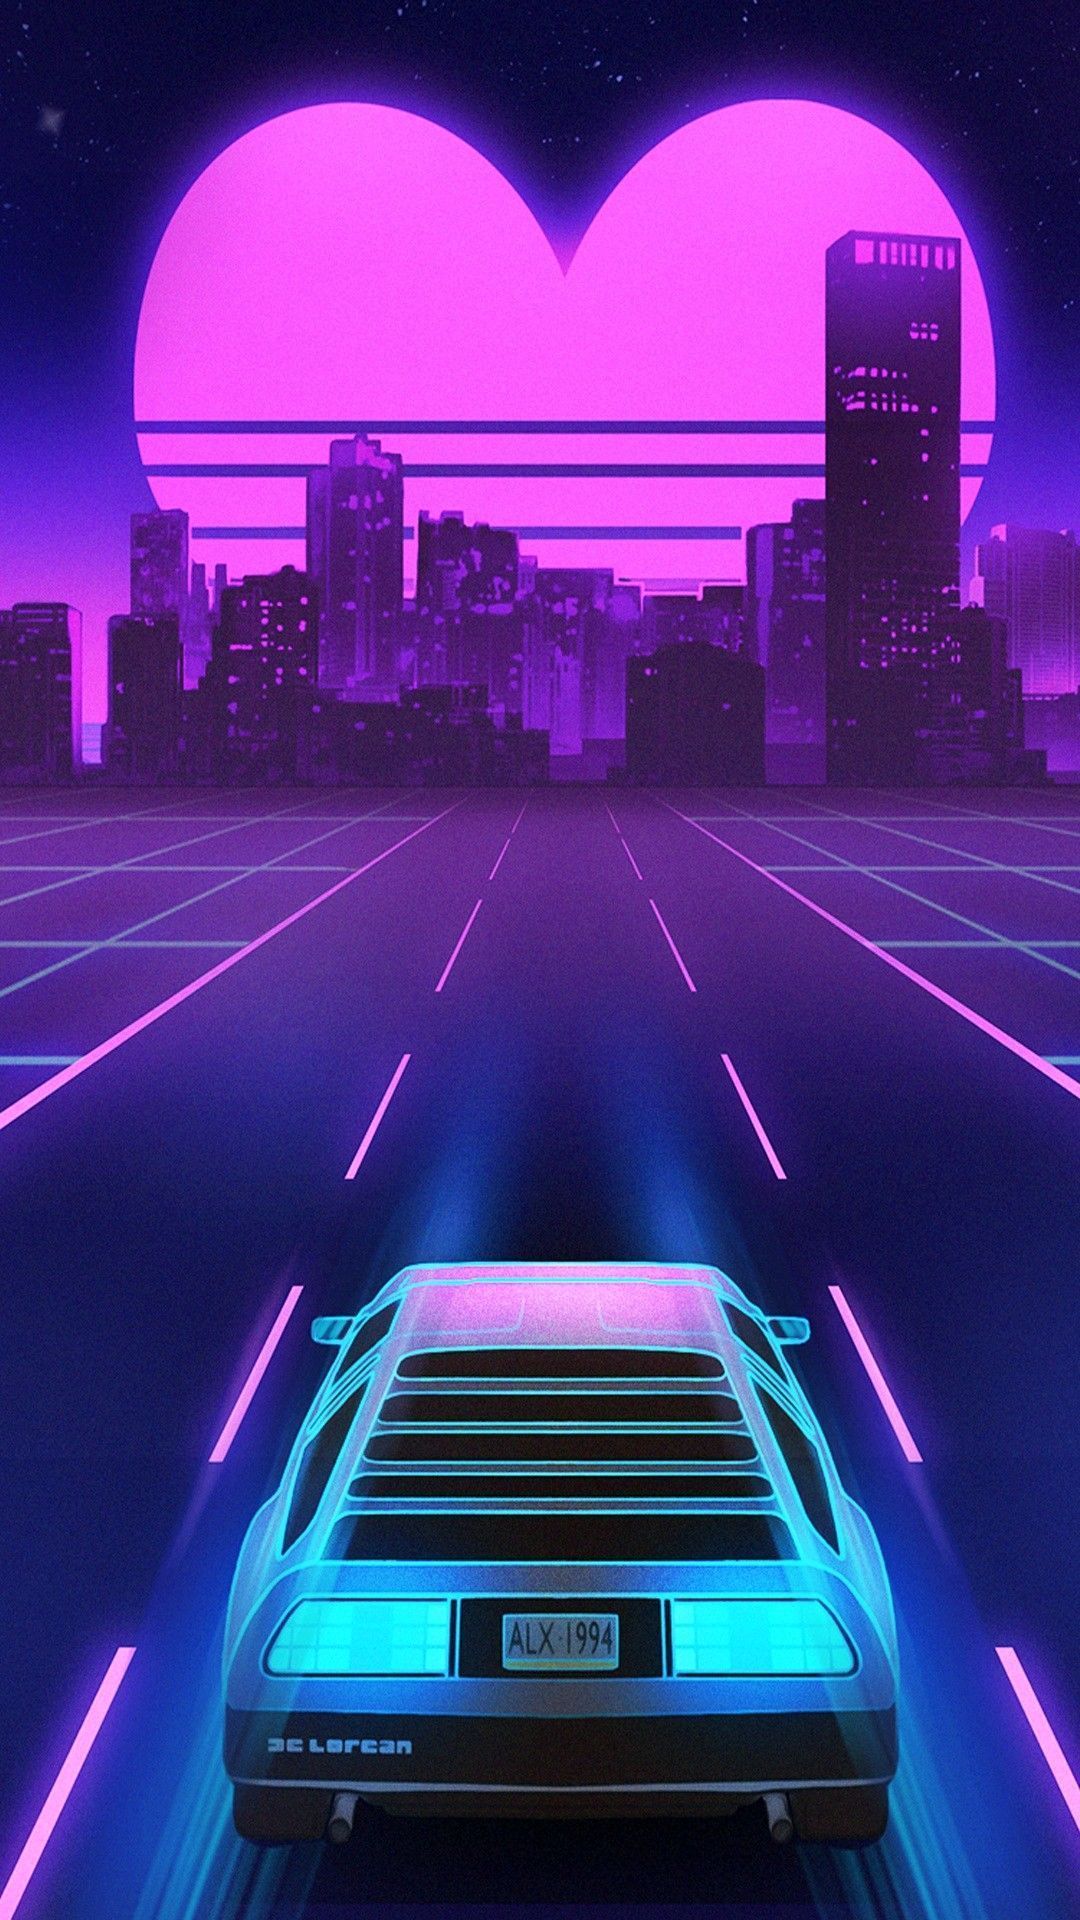 A car is driving down the road in front of an illuminated city - Cyberpunk